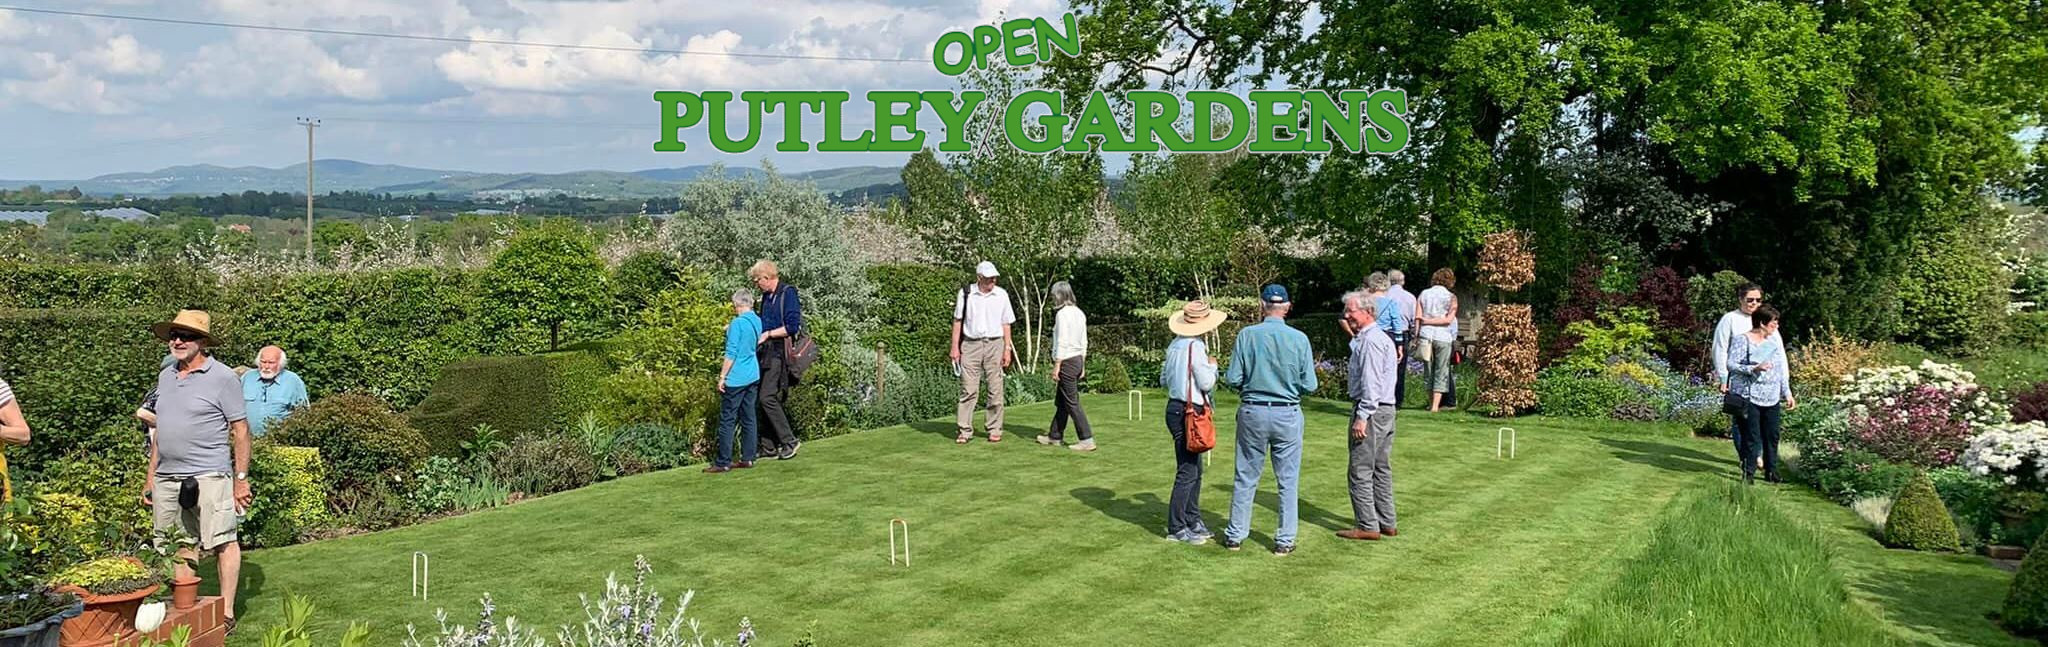 Putley Open Gardens the annual opening of Putley residents gardens to the public